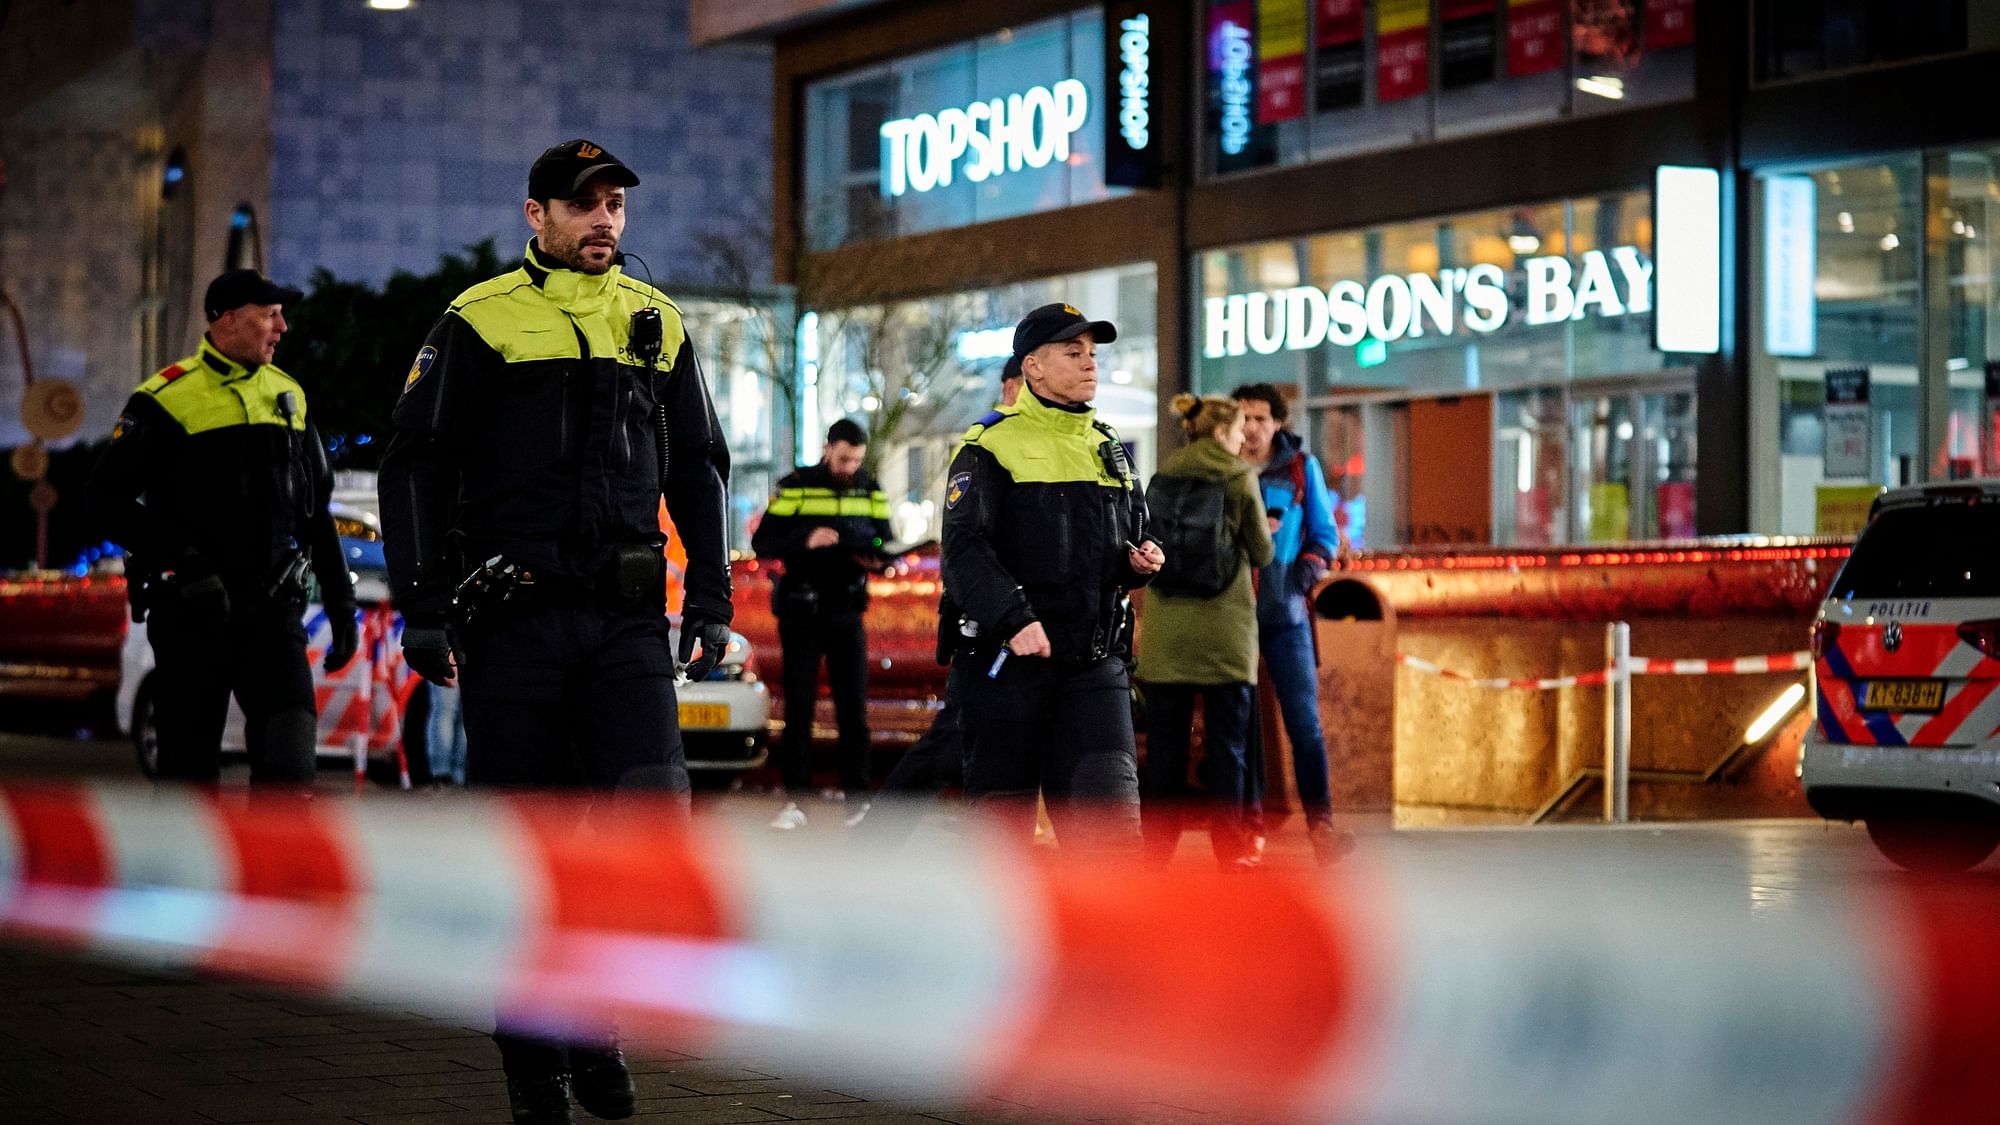 Dutch police secure a shopping street after a stabbing incident in the center of The Hague, Netherlands.